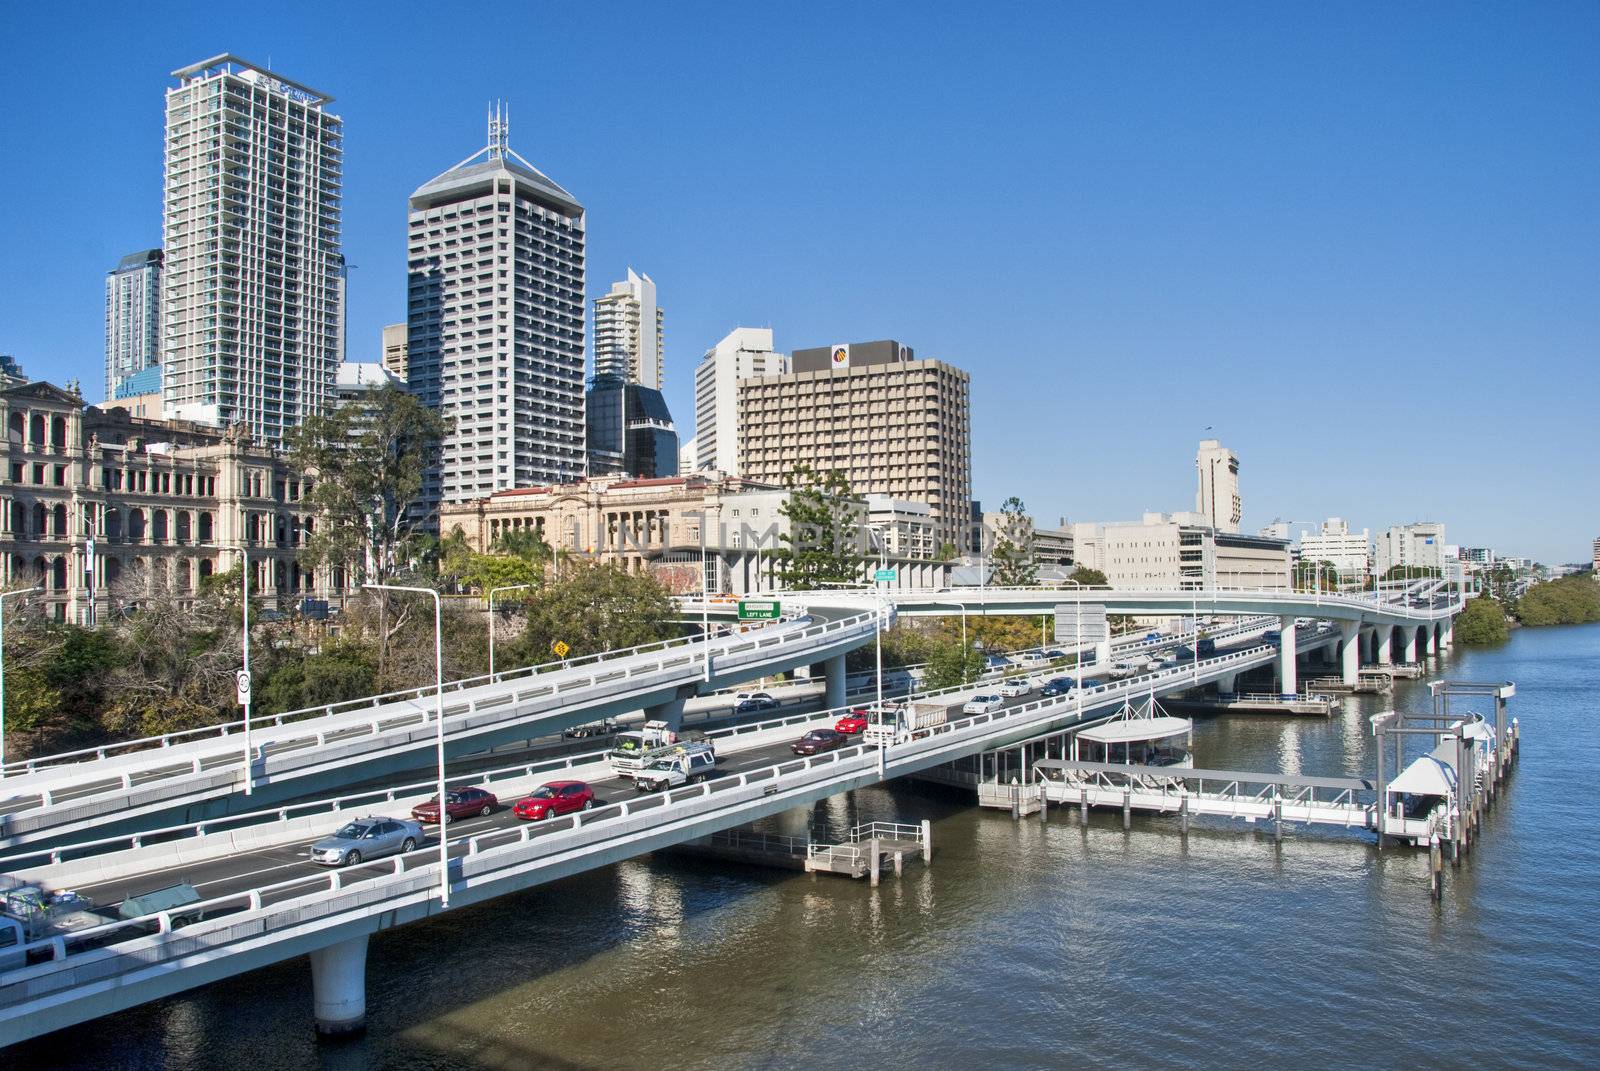 A view of Brisbane from the main bridge